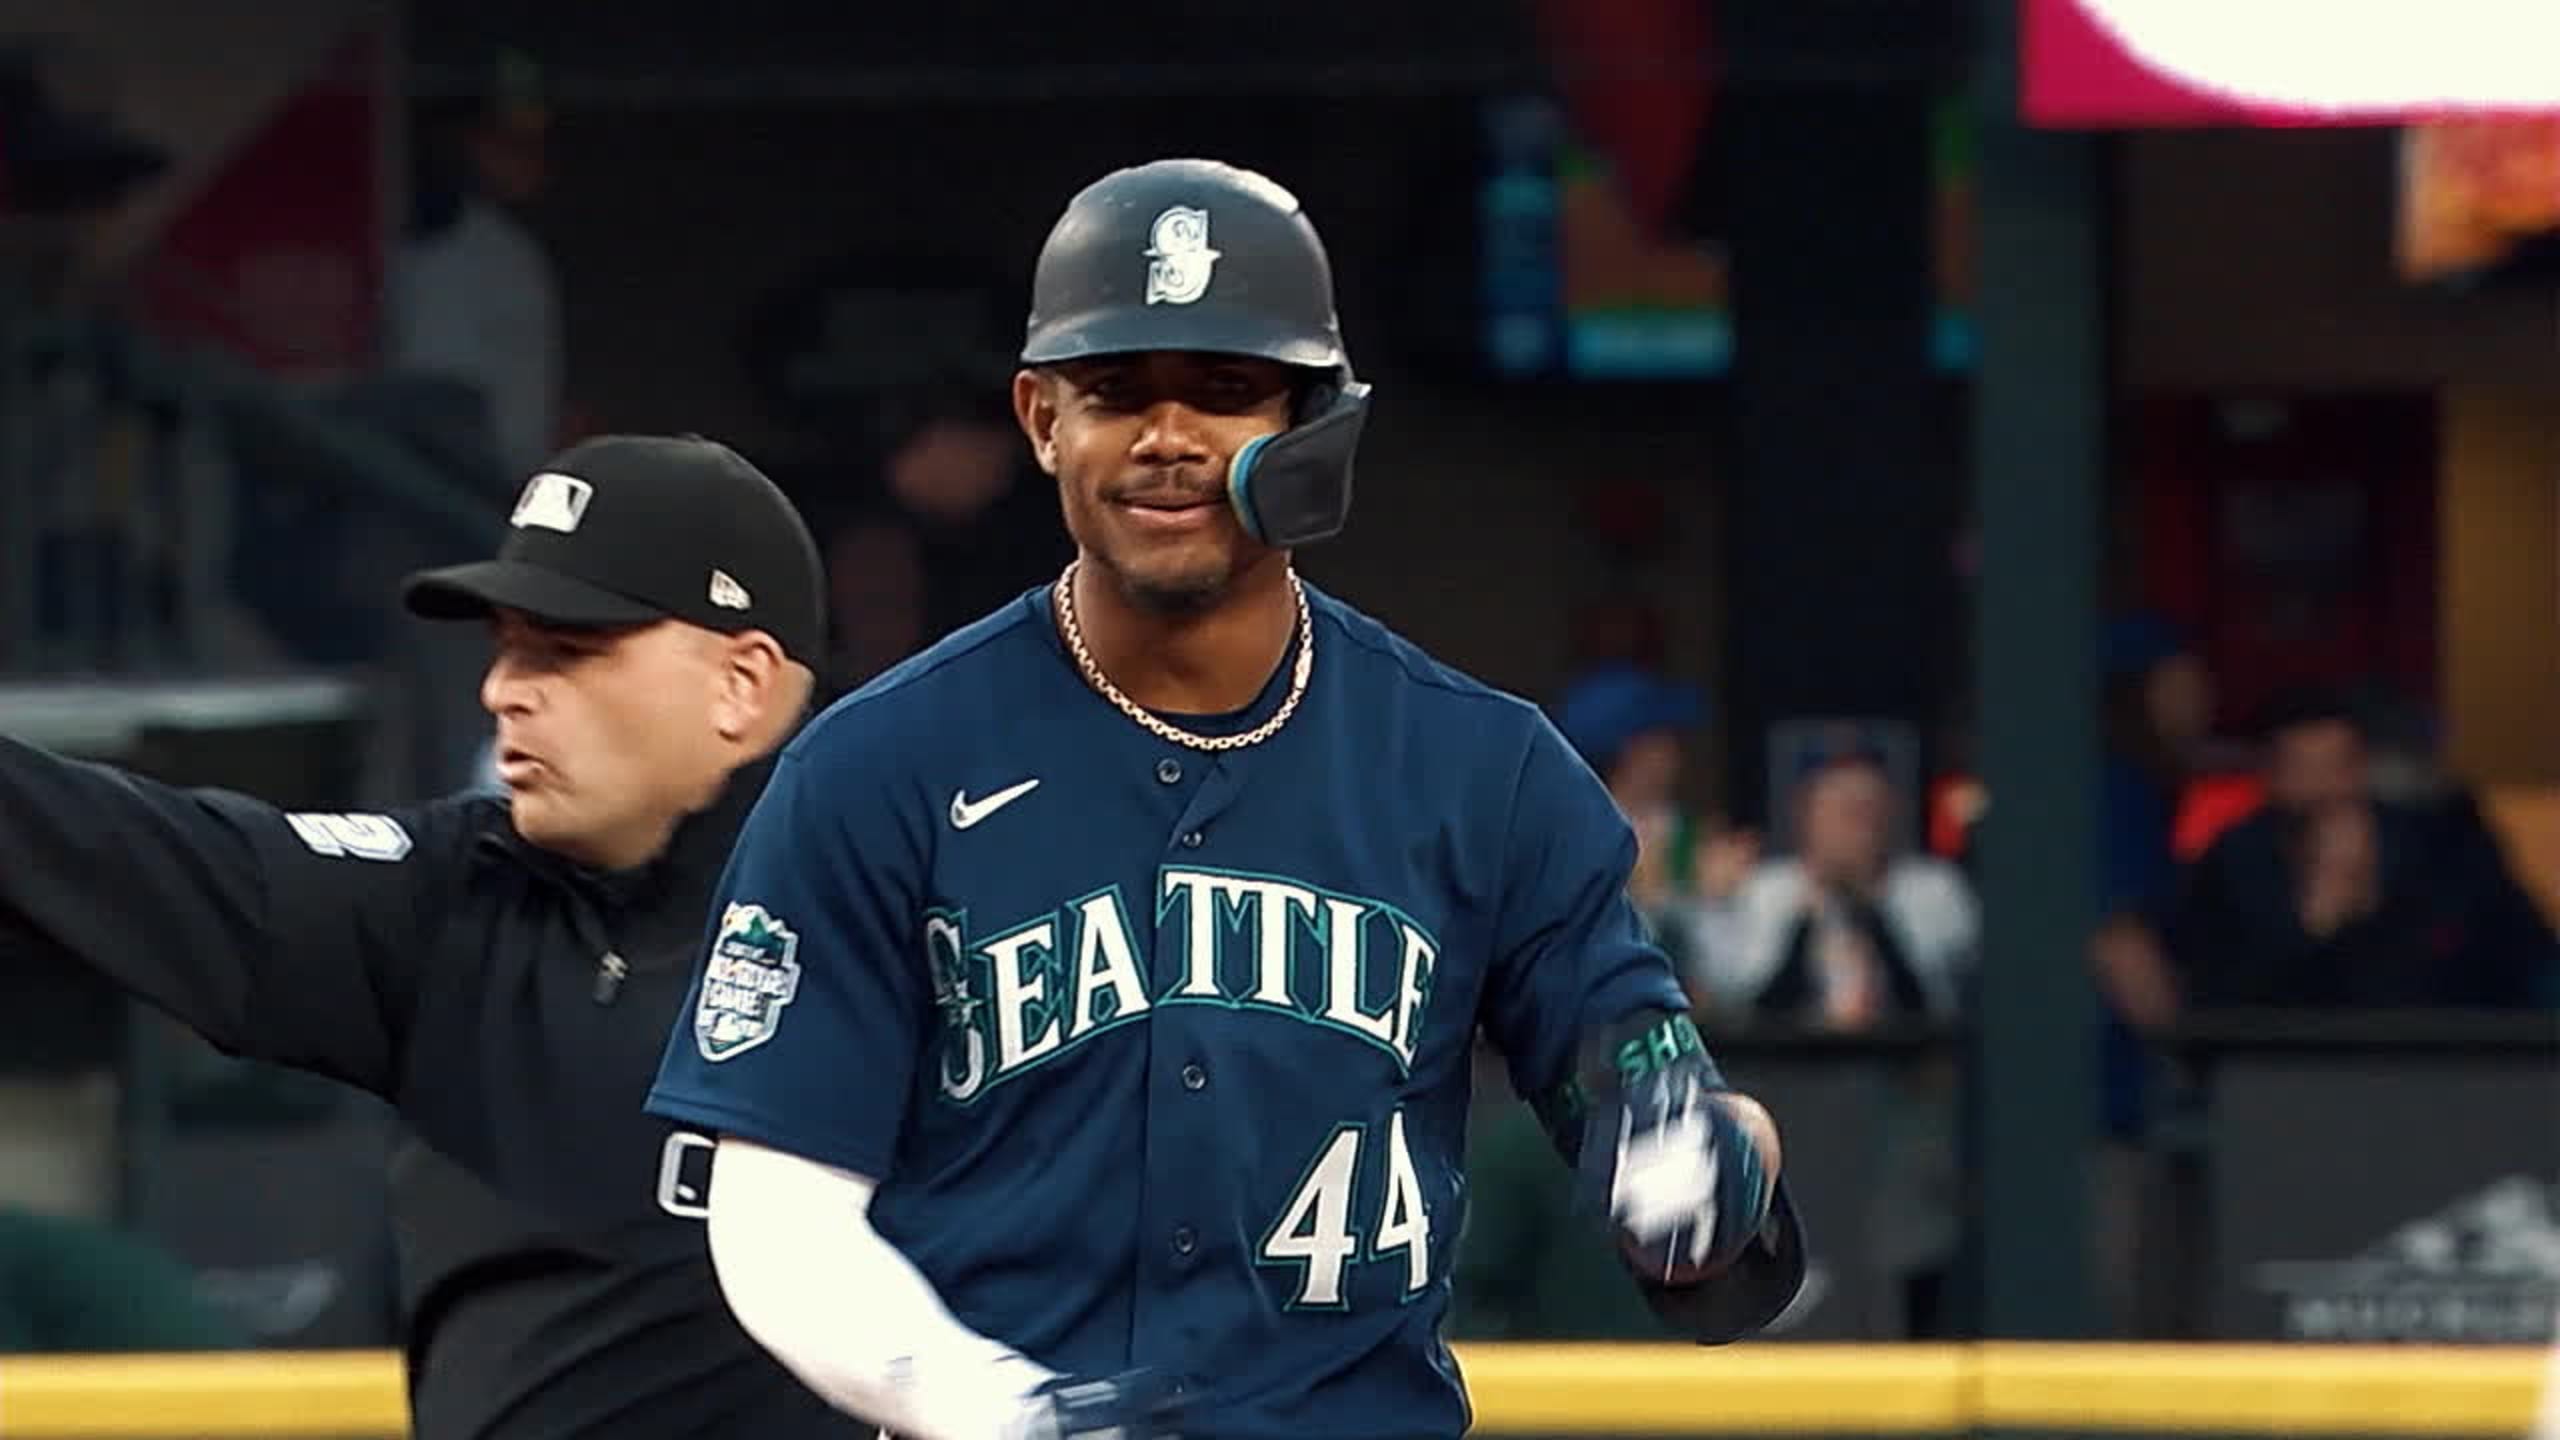 Mariners' rookie Julio Rodríguez is heading to the 2022 MLB All-Star Game